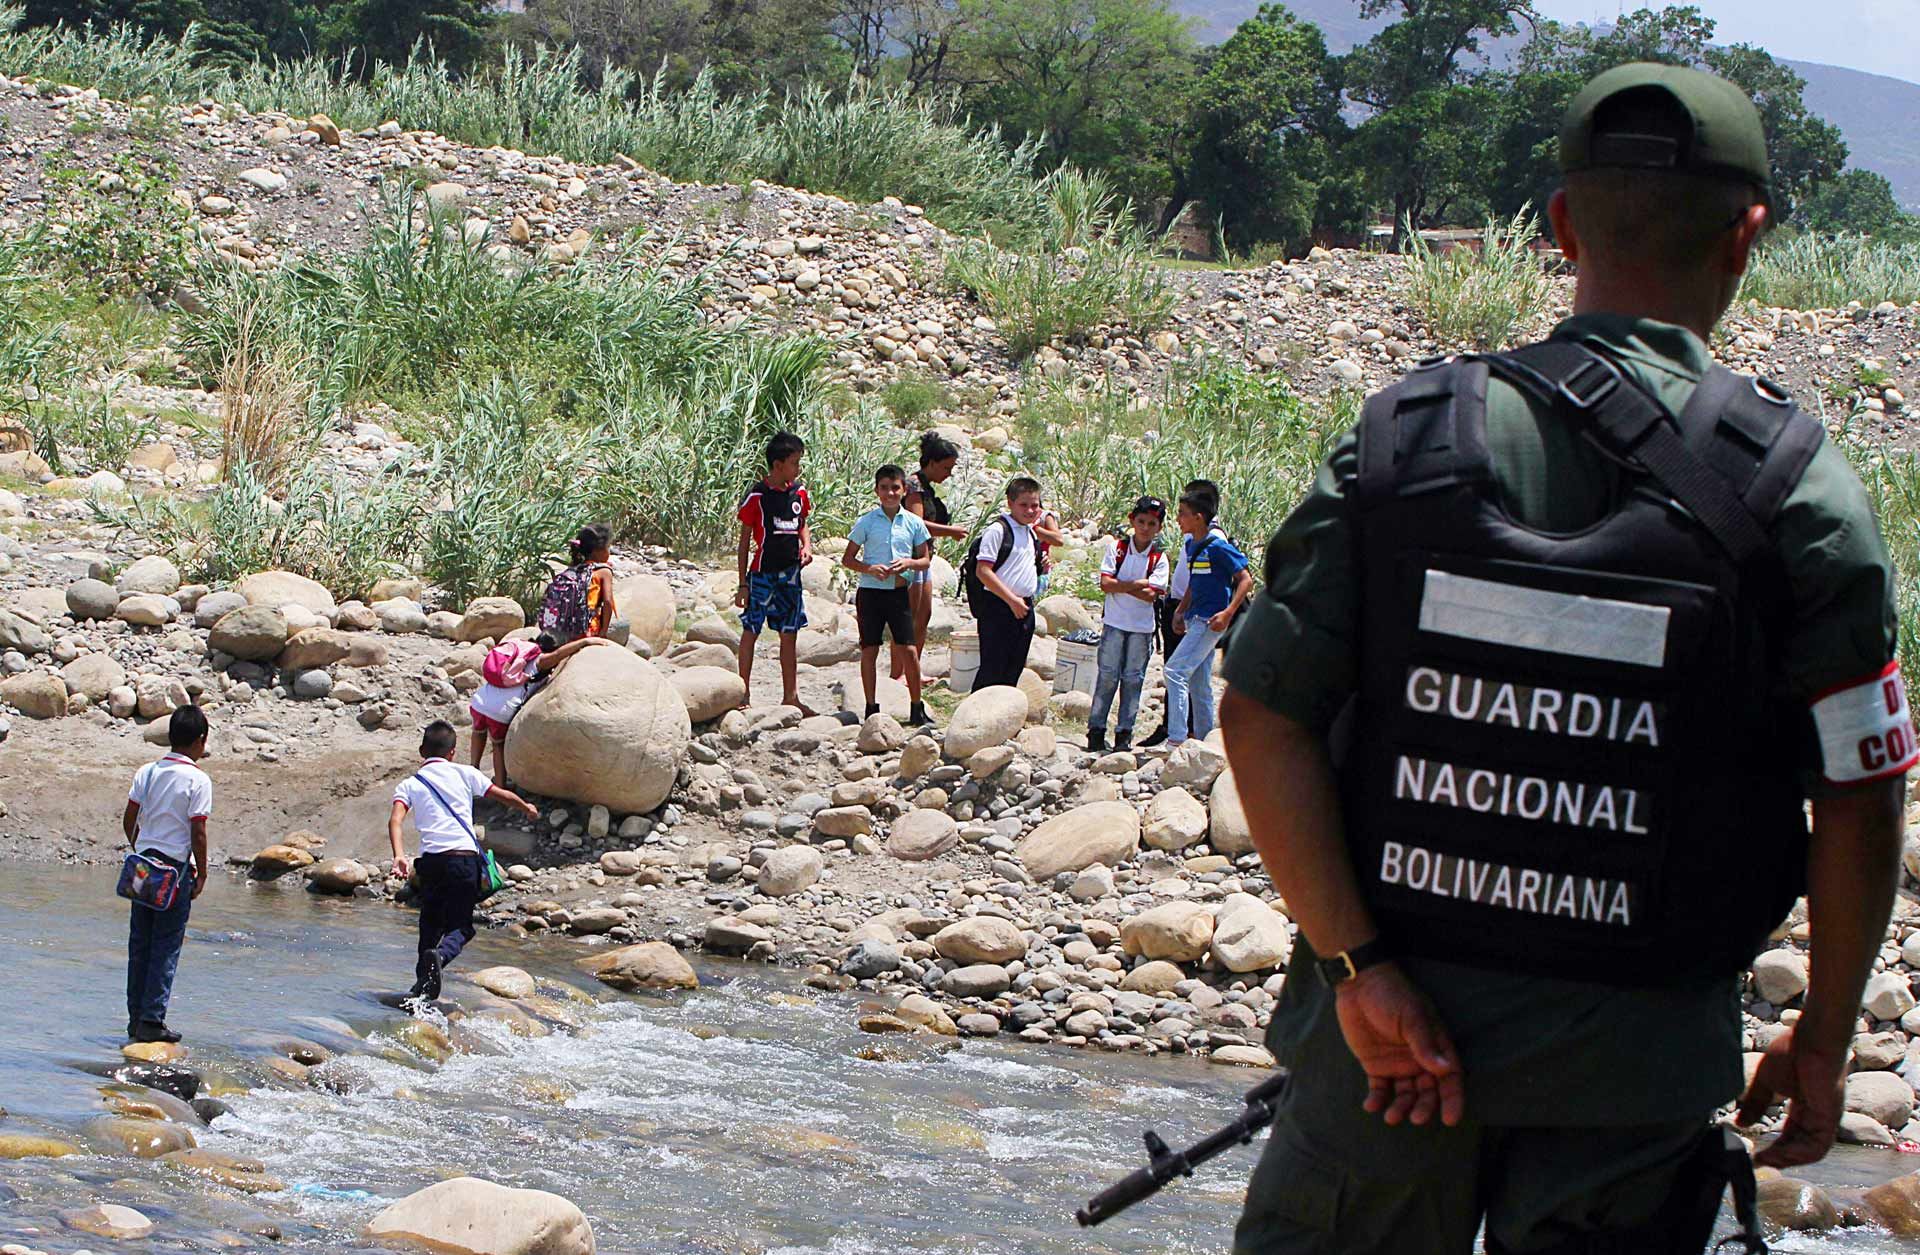 A member of the Venezuelan national guard stands watch at the Tachira River, at the Colombian border. Criminal activity, driven in part by smuggling, will persist in parts of the border region.